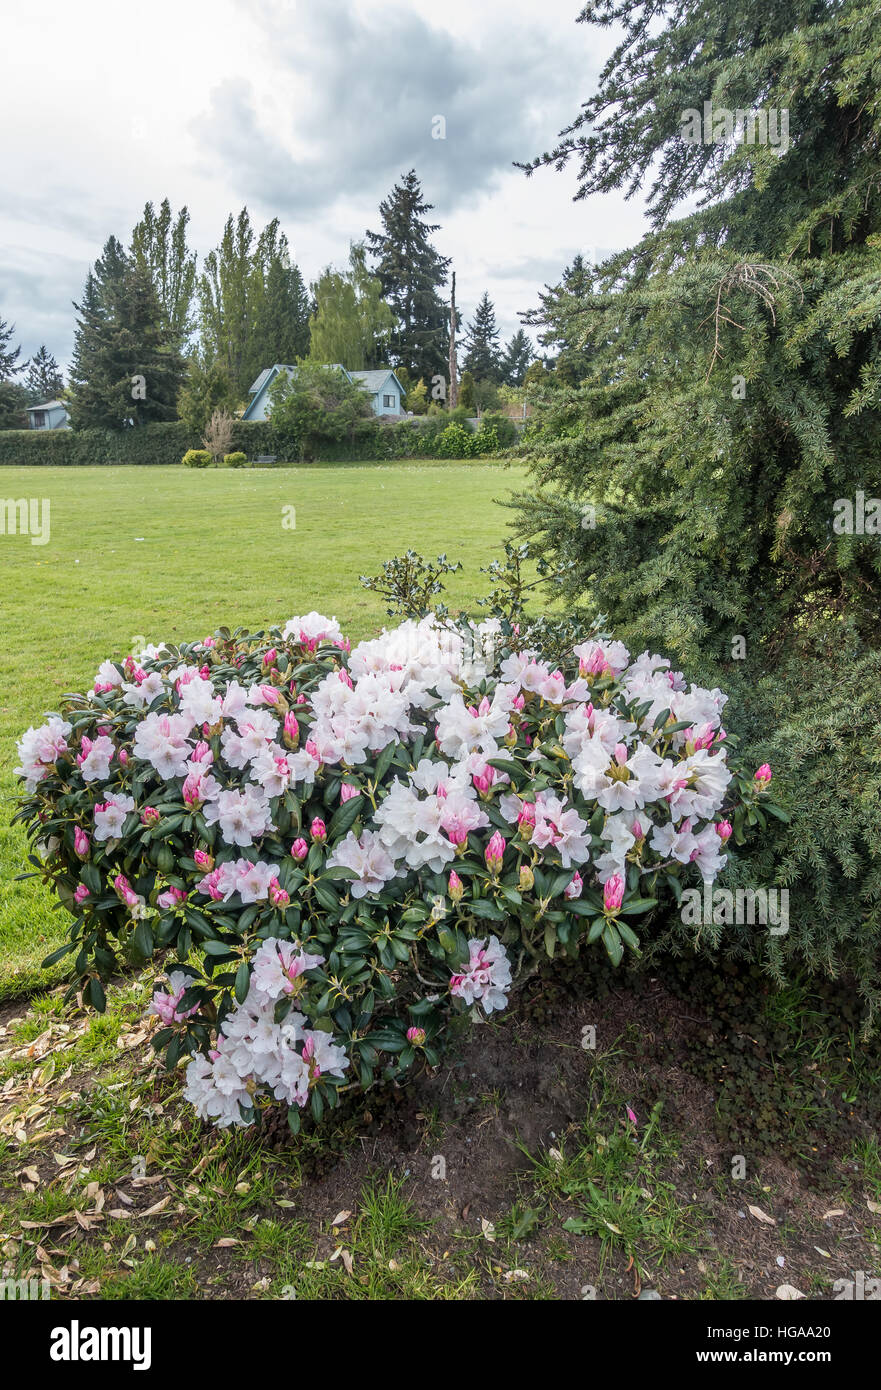 A view of a pink and white Rhododendron bush. Stock Photo